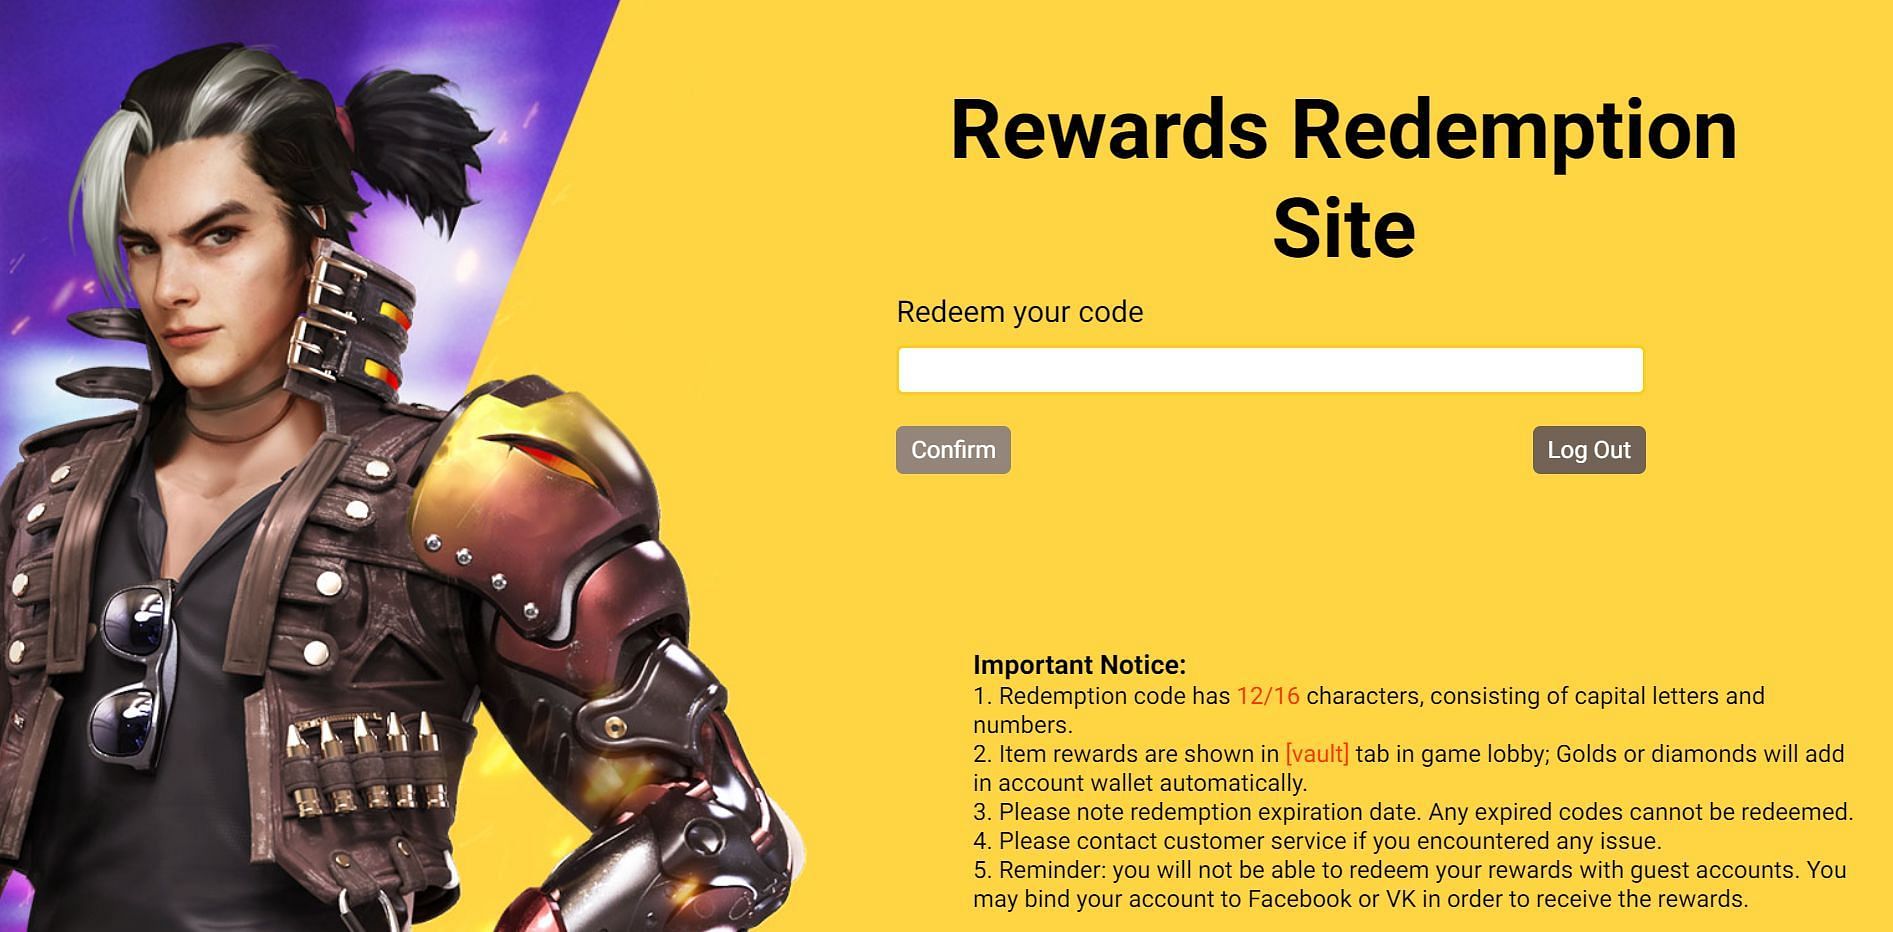 The redeem code can now be entered into the text box (Image via Garena)